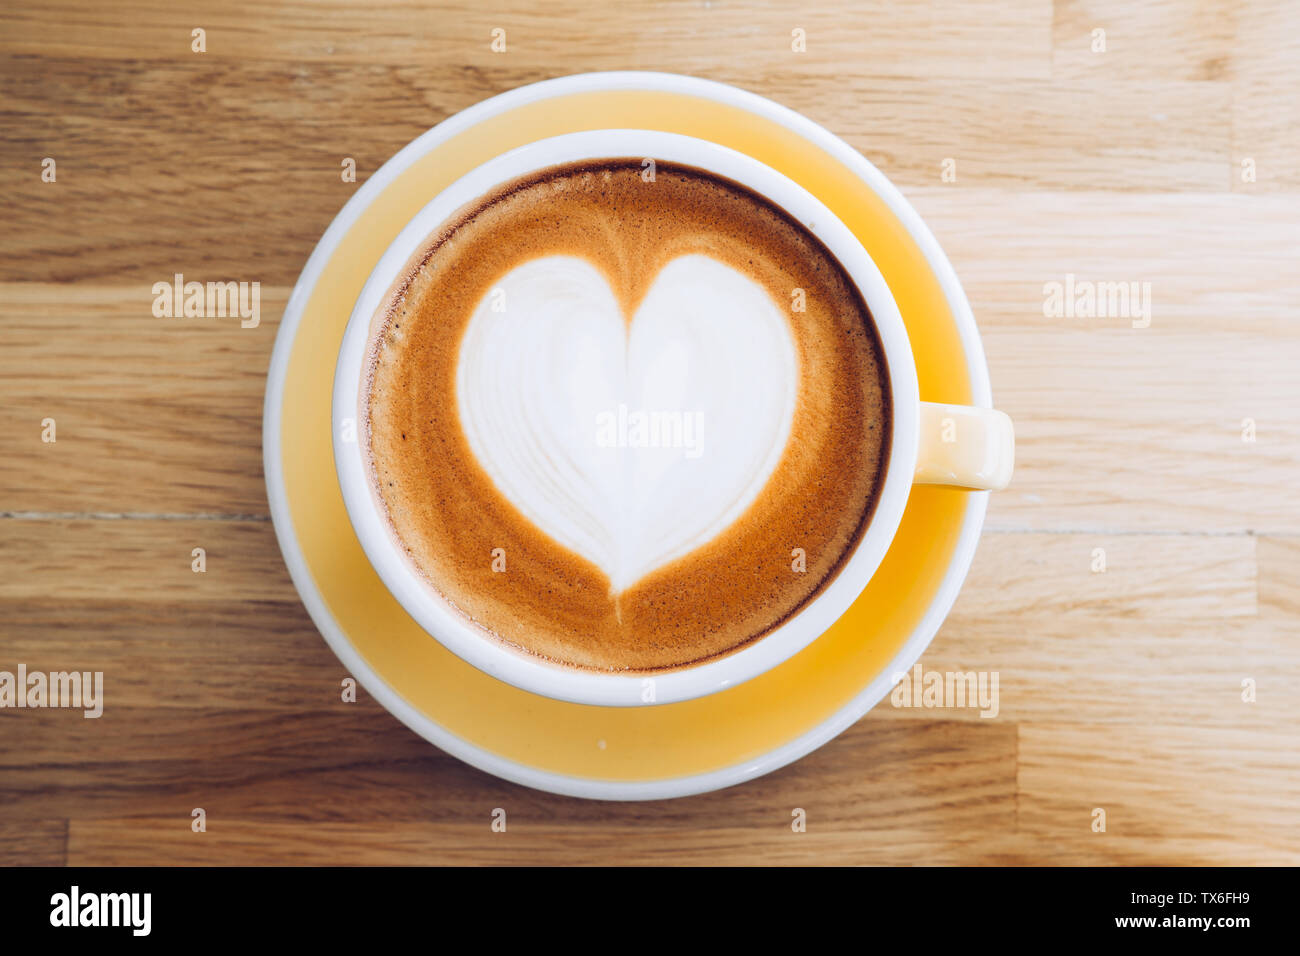 https://c8.alamy.com/comp/TX6FH9/top-view-of-hot-cappuccino-coffee-cup-on-wooden-tray-with-heart-latte-art-on-wood-table-at-cafebanner-size-food-and-drink-concept-TX6FH9.jpg